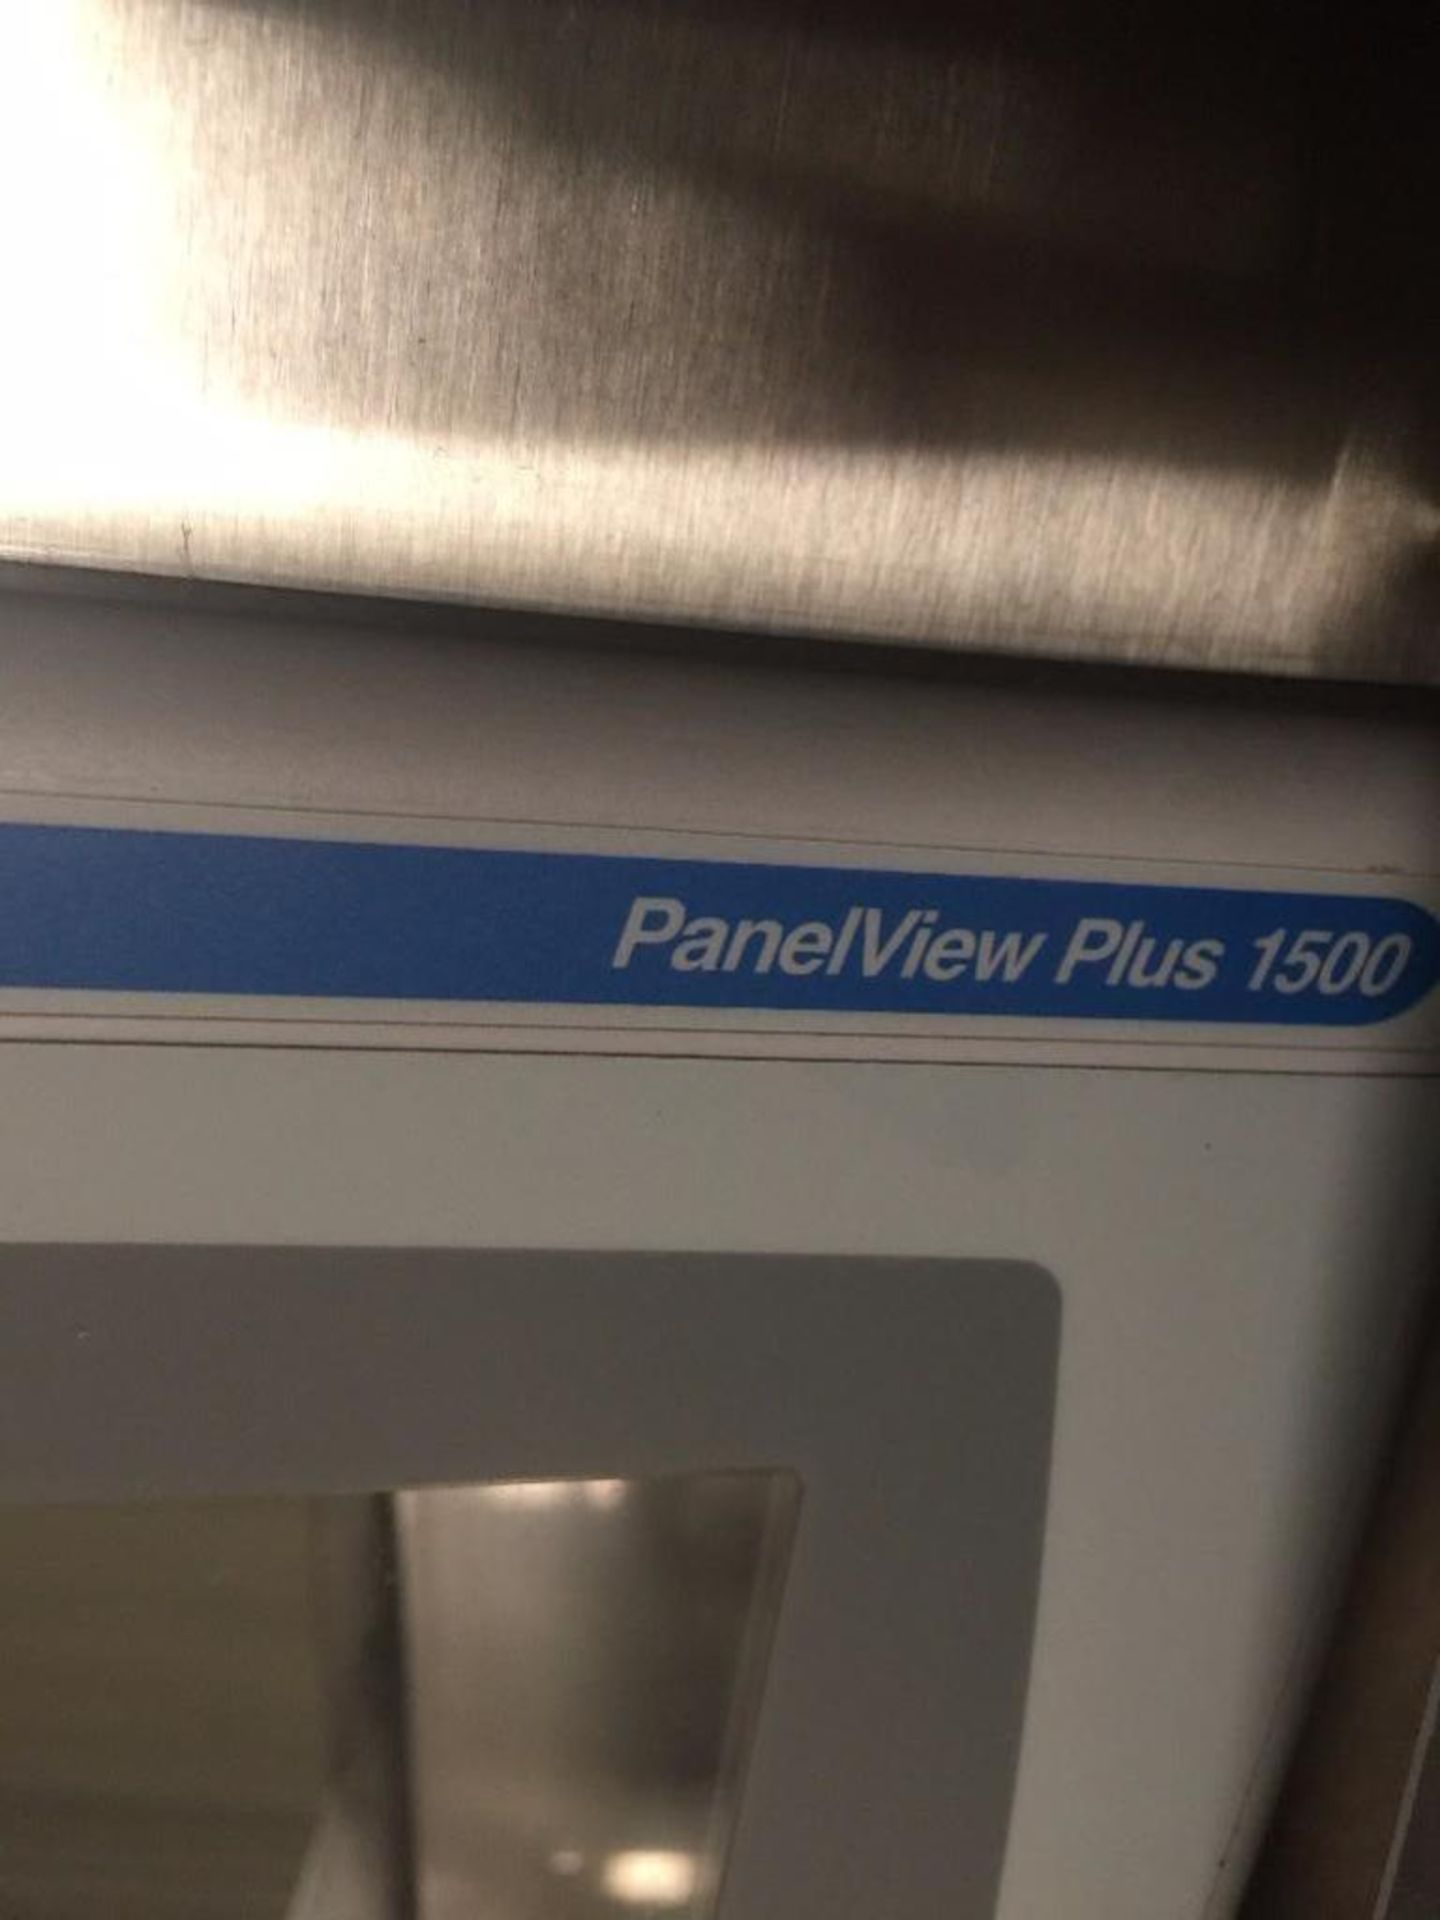 SS control panel with Panelview plus 1500, and (2) scale readouts, for two ribbon blender/mixers lot - Image 2 of 7